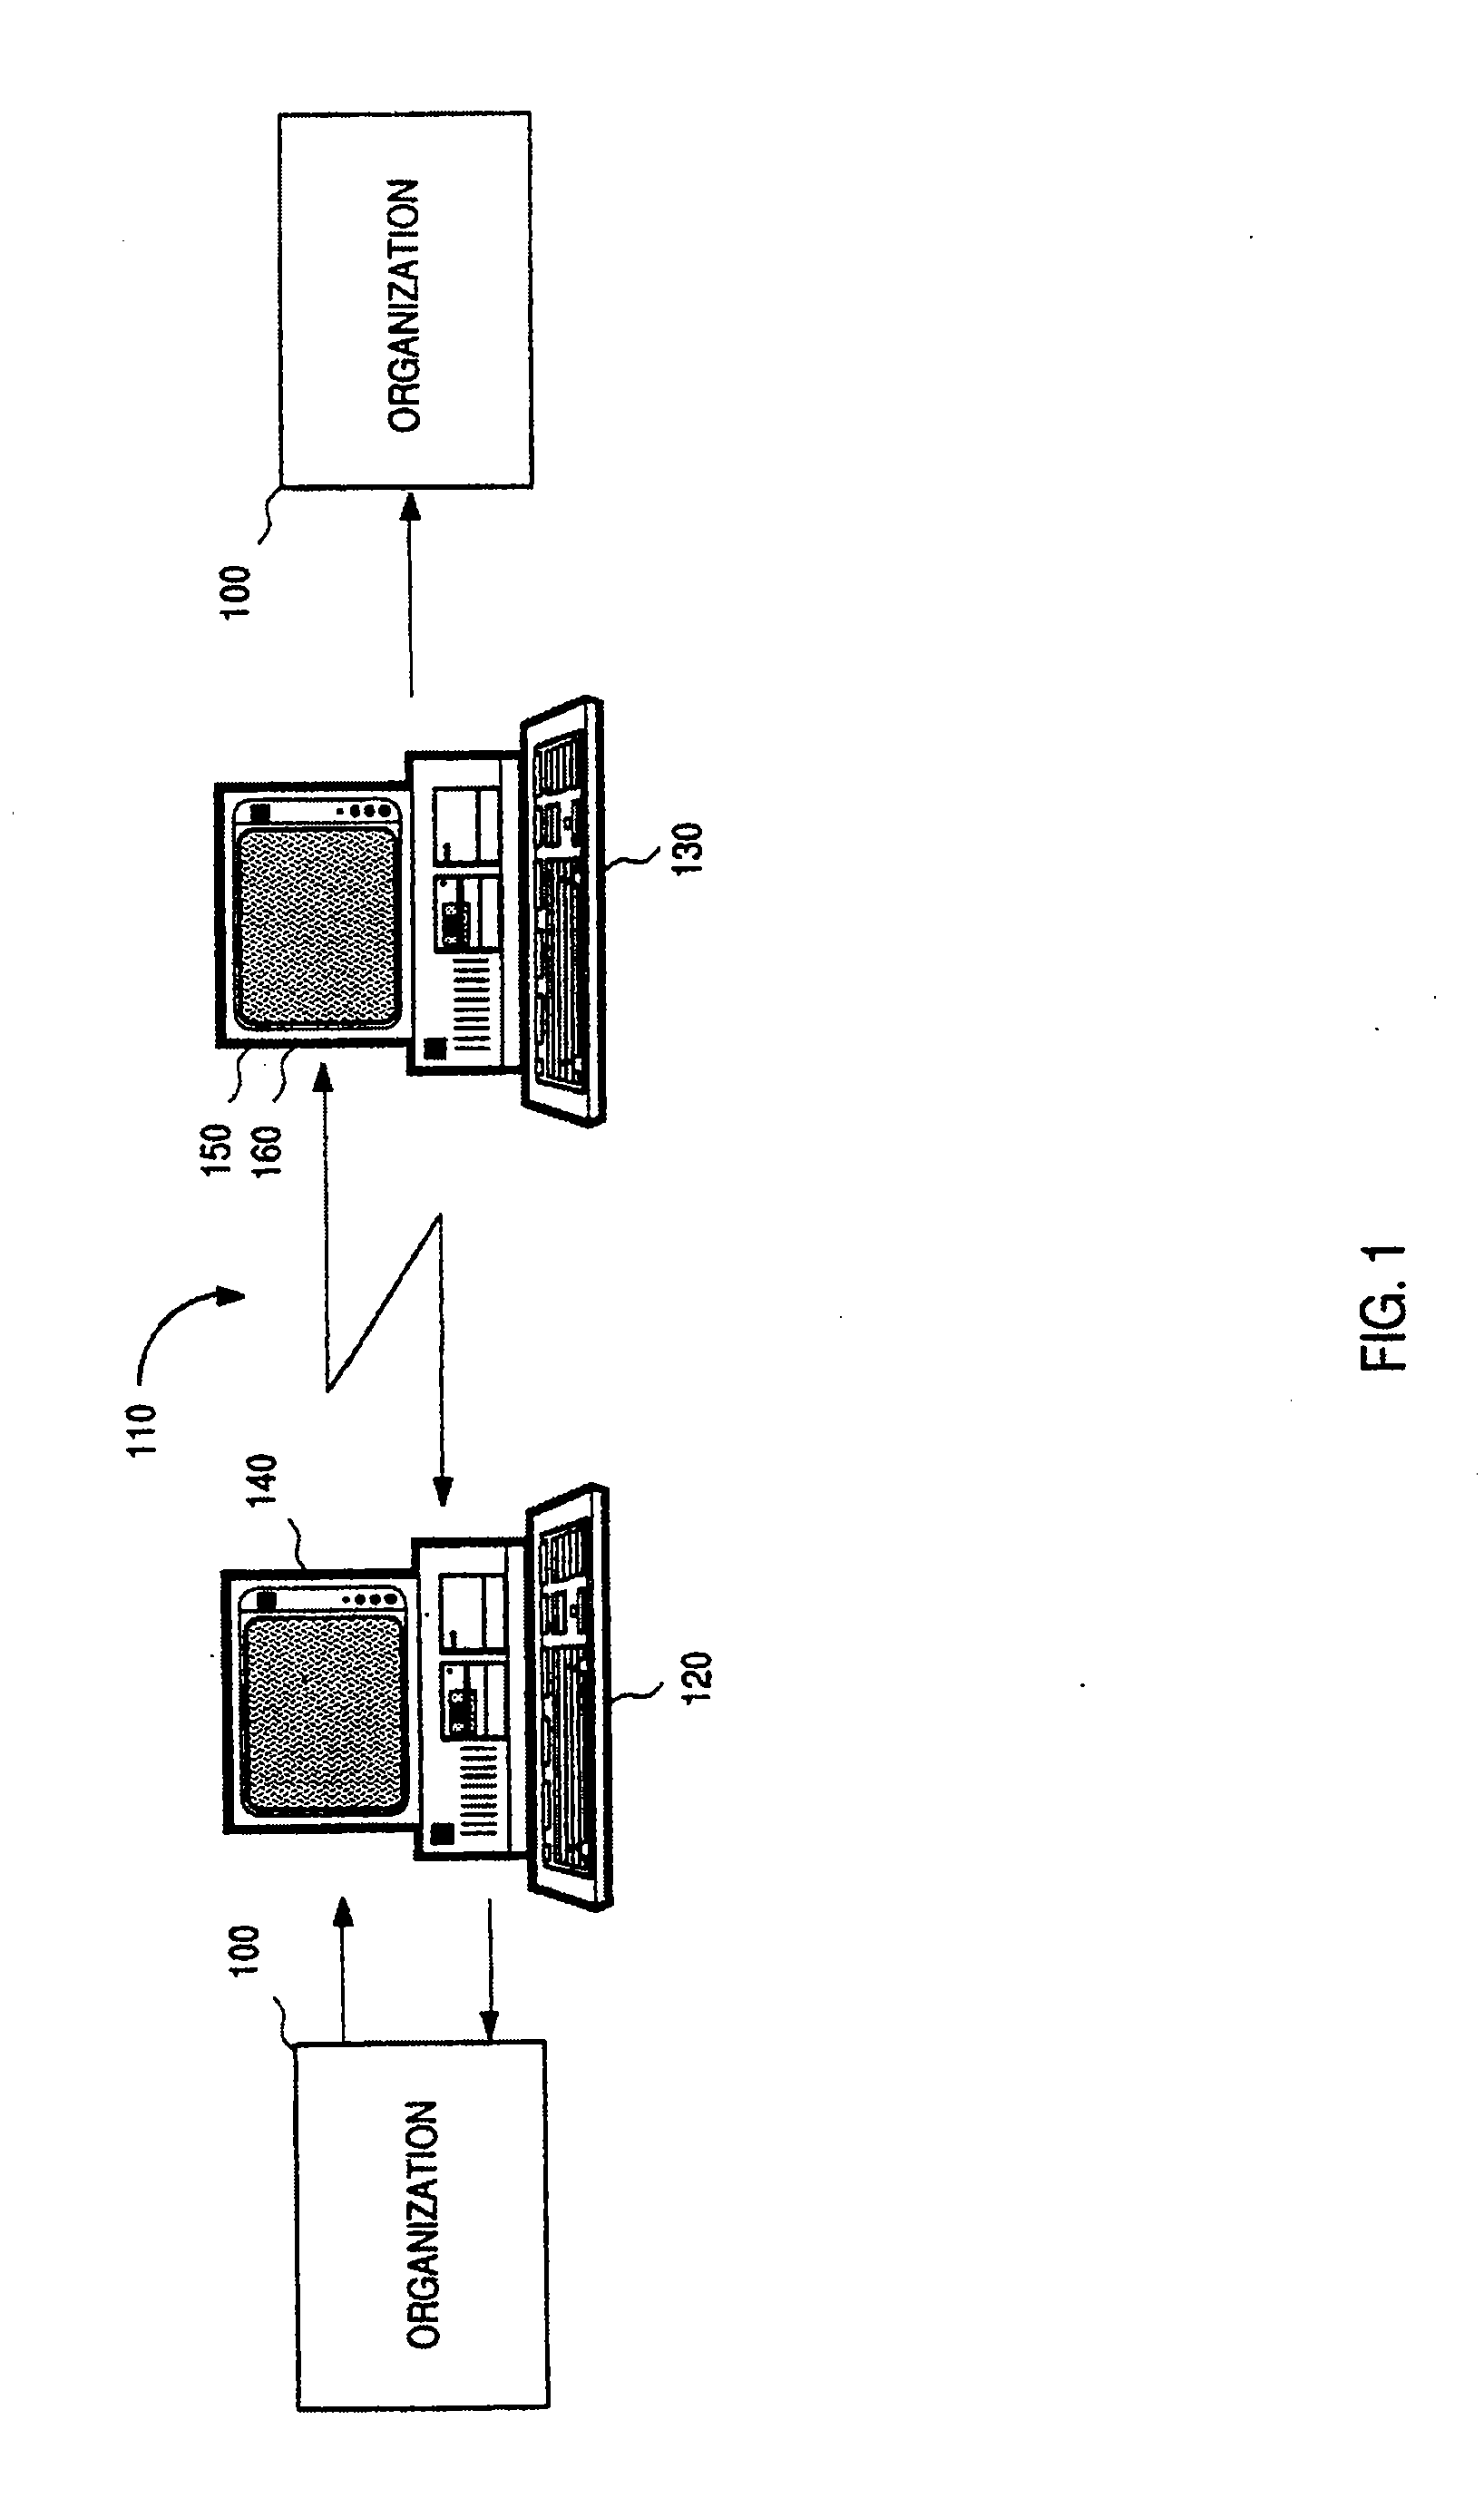 Method and apparatus for allocating tasks and resources for a project lifecycle